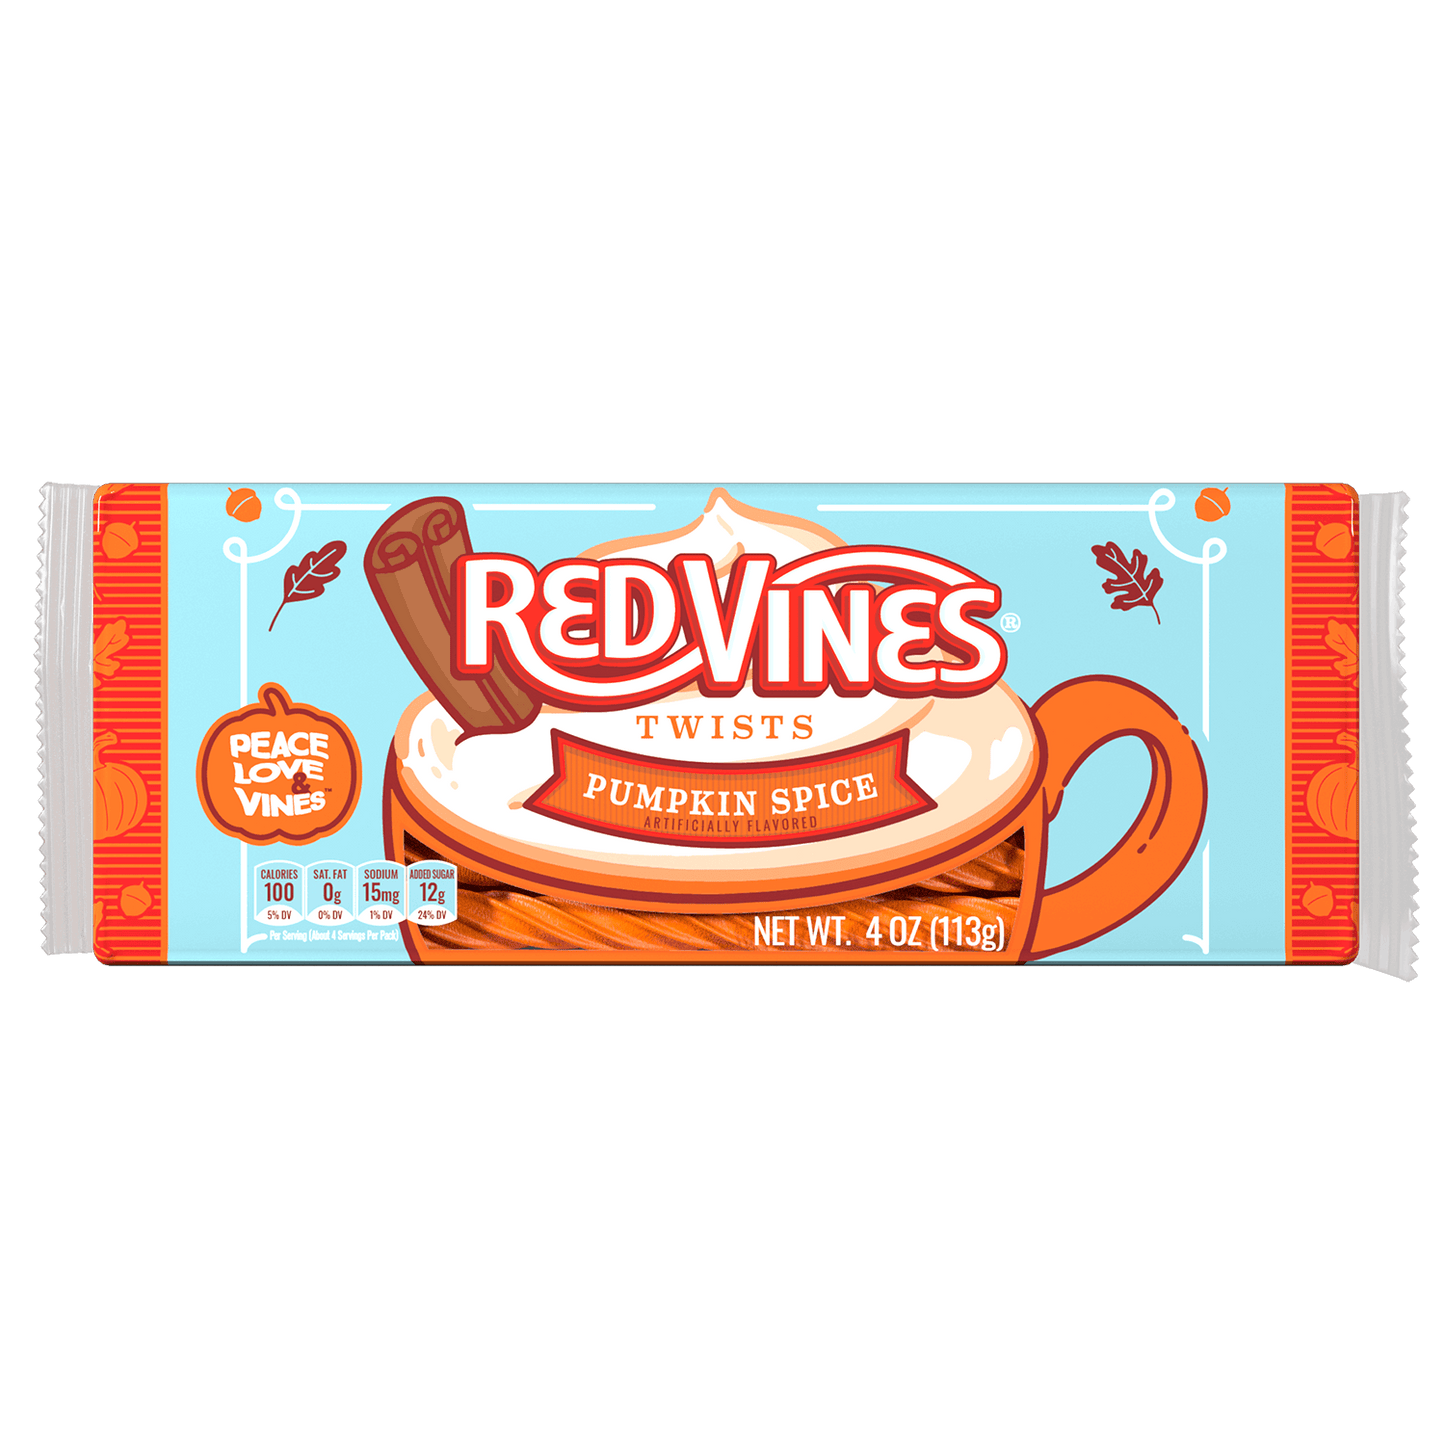 RED VINES Pumpkin Spice Twists Halloween Candy - Front of 4oz Tray